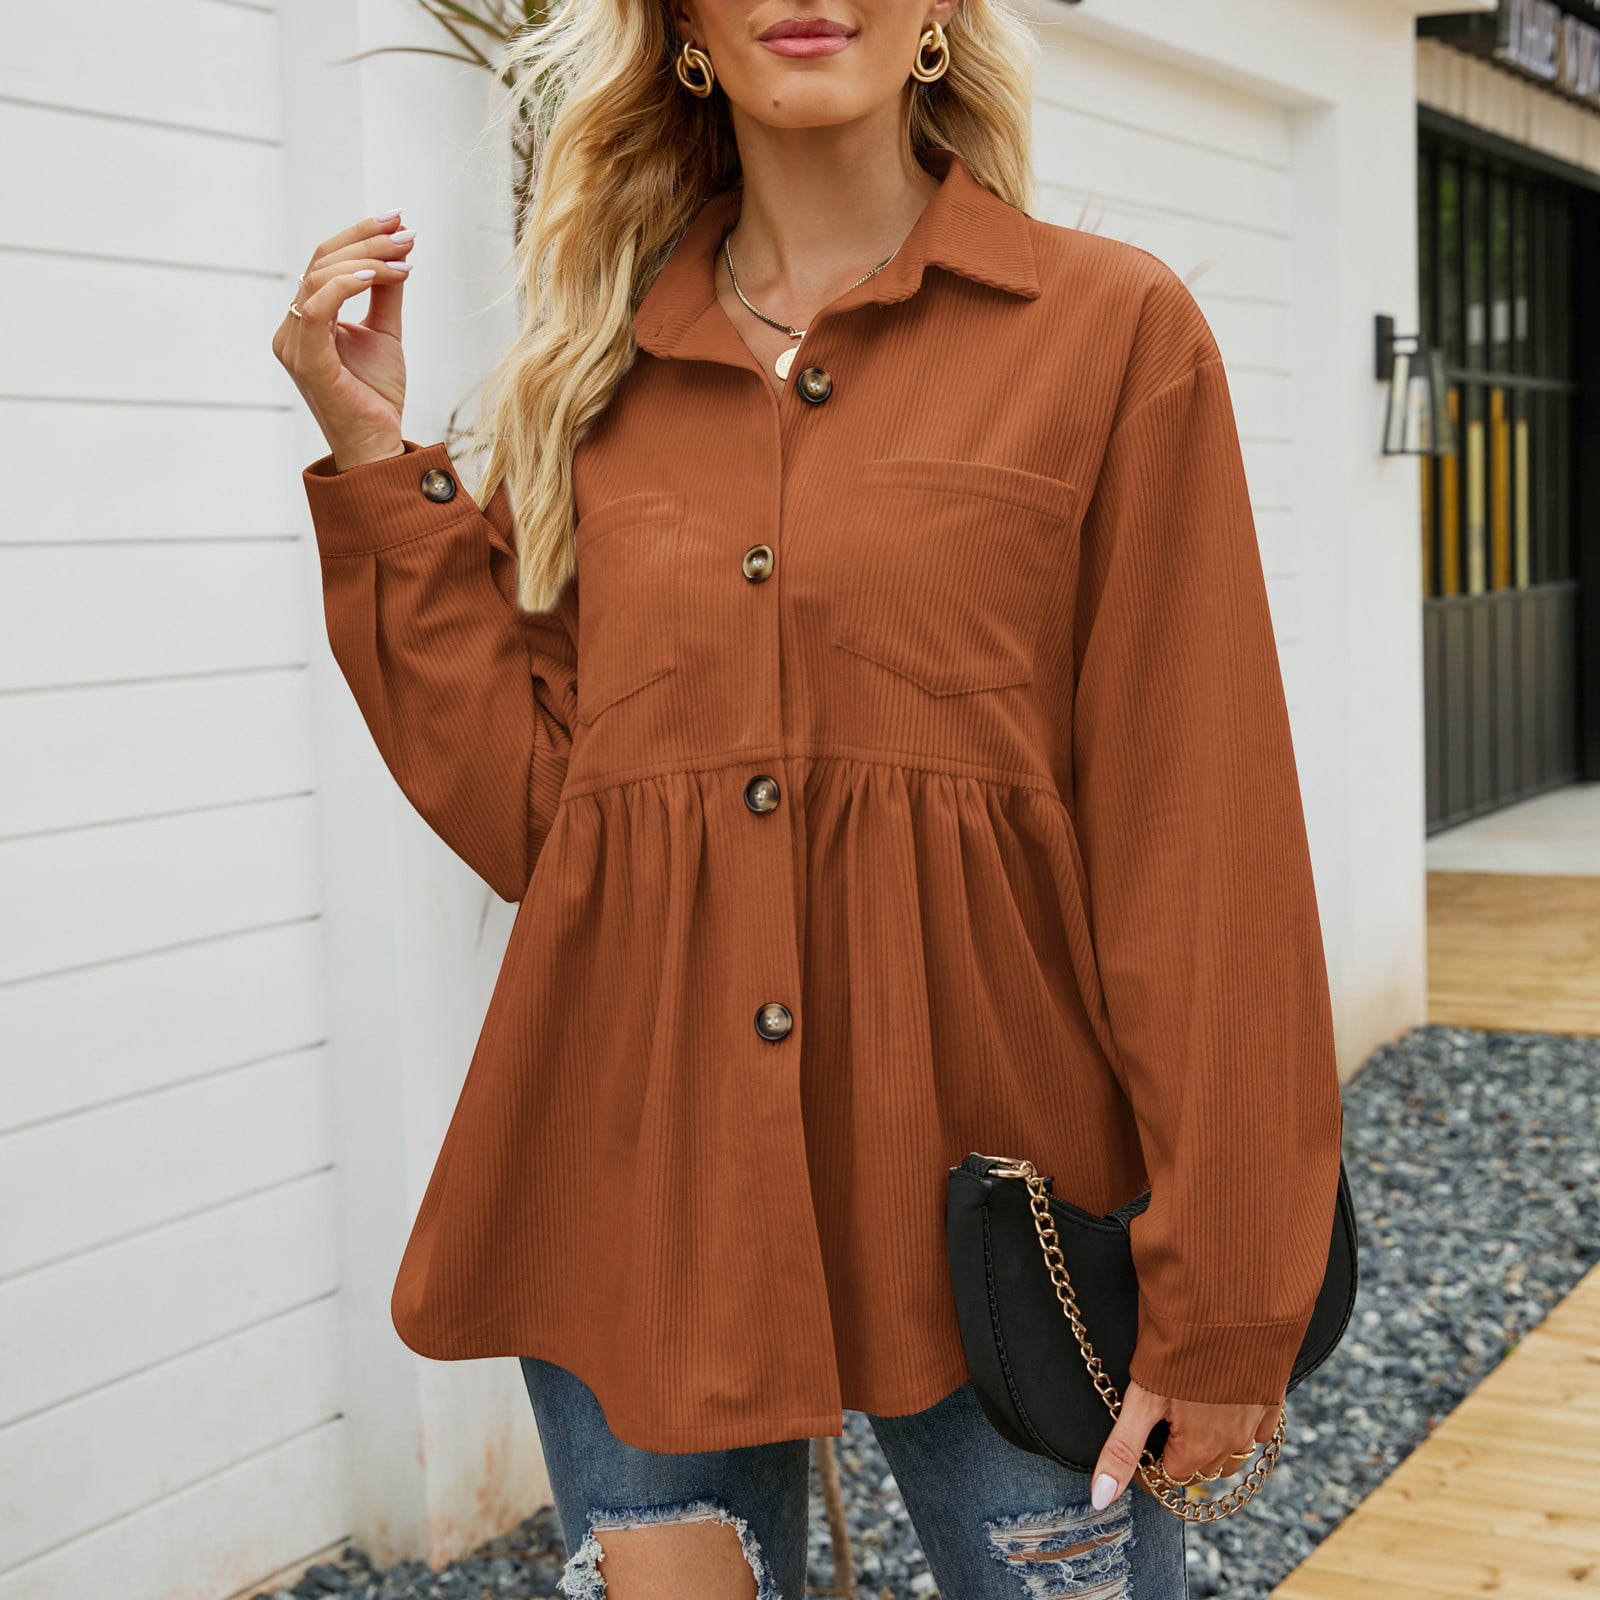 Zanvin Fall Shirts Sales Clearance! Women's Casual Solid Color